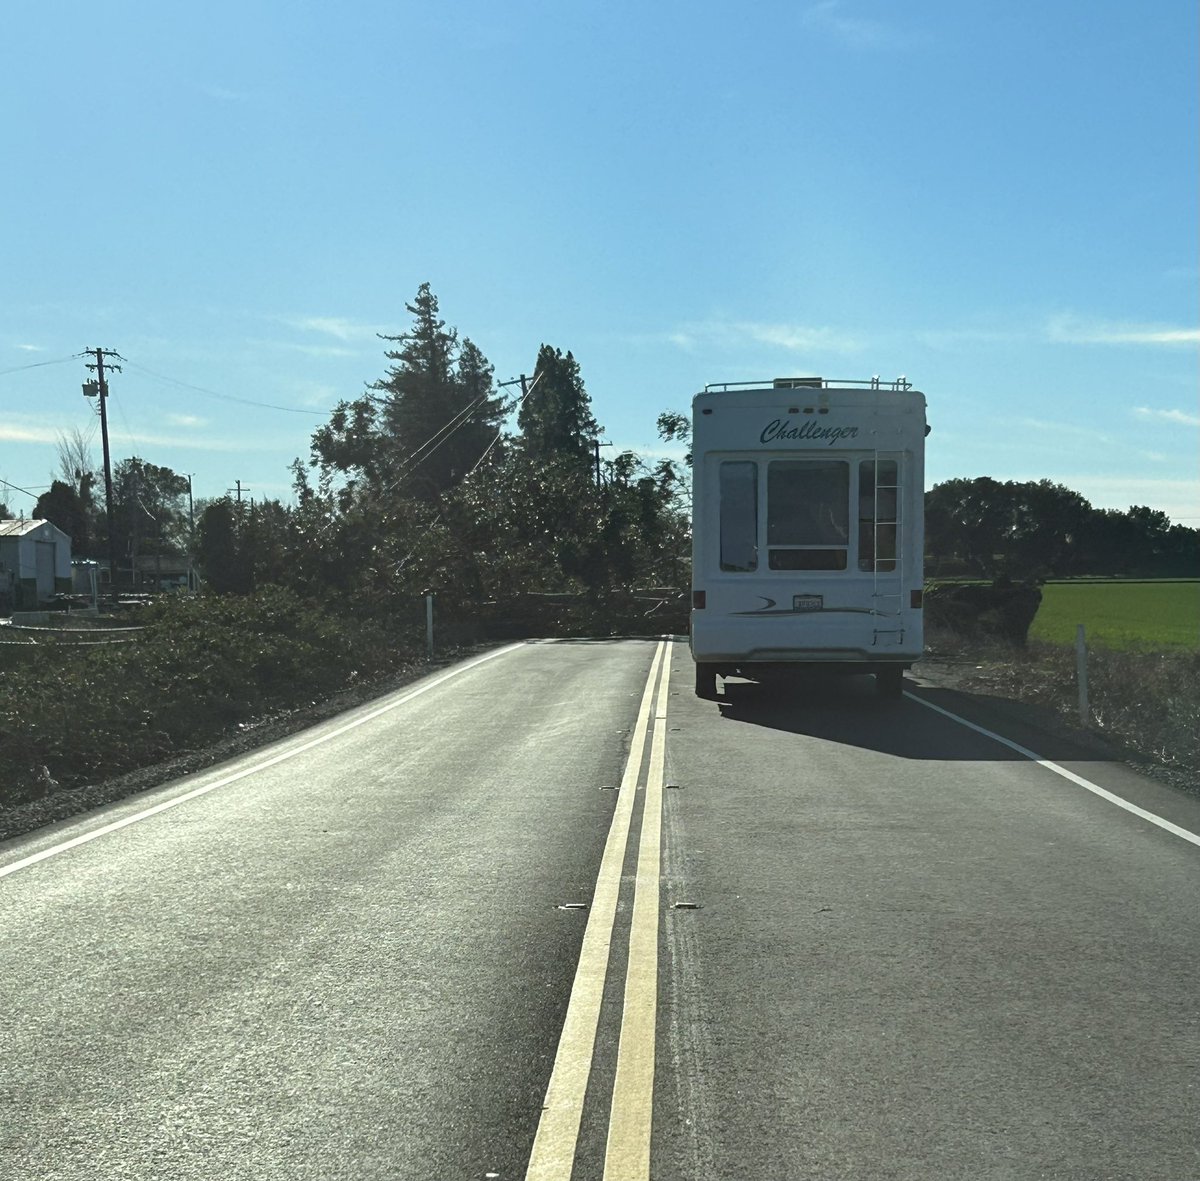 Alert: Twin cities road is closed by a fallen tree (brought the power line down too) ~ 1.5 miles west of I-5. #RoadClosureUpdate #twincitiesroad